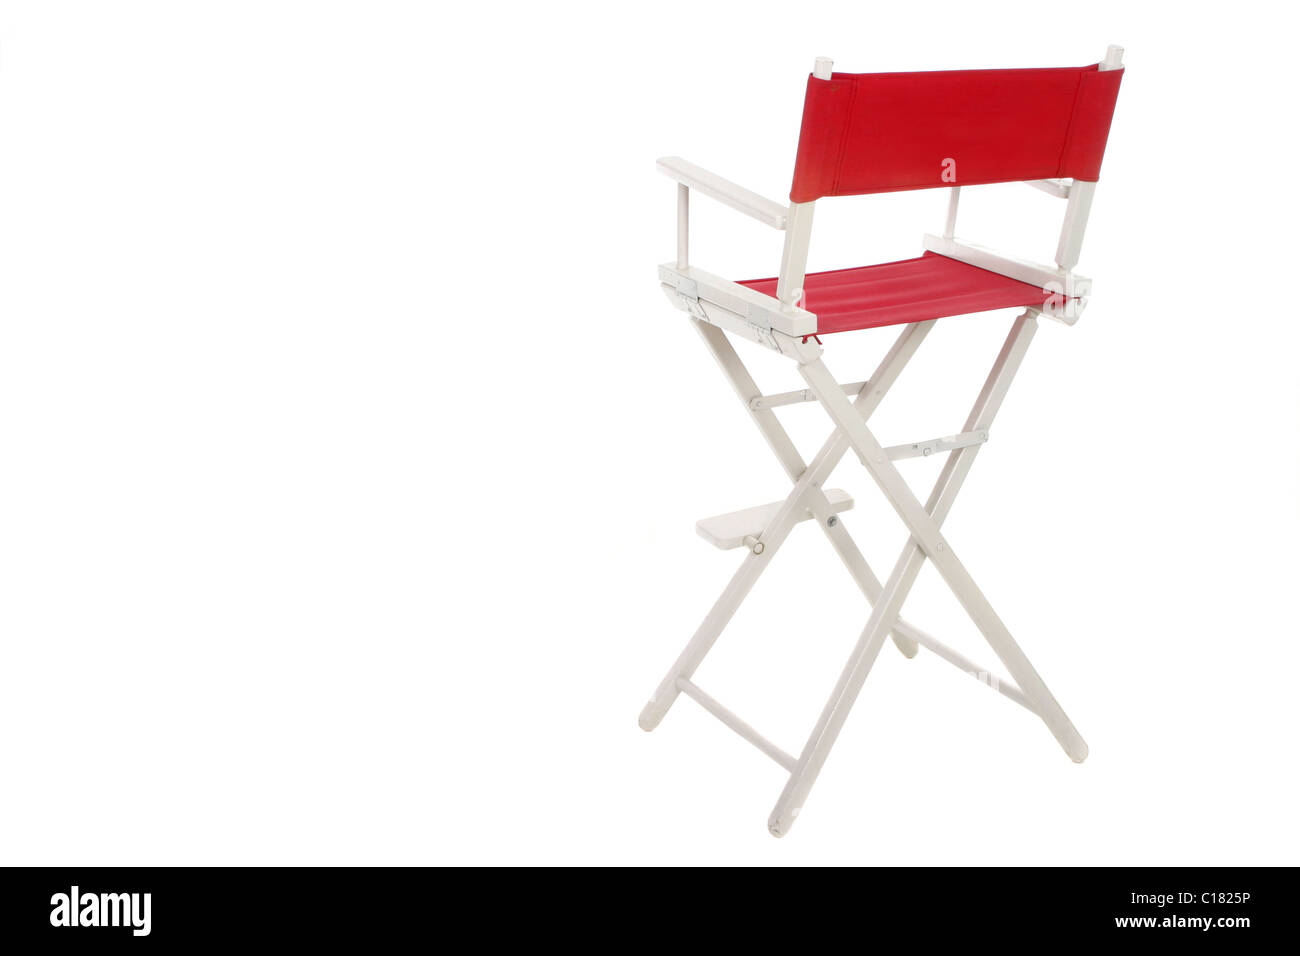 Director's chair with red seat and back on a white frame. Isolated on white background. Copyspace room on left for text. Stock Photo